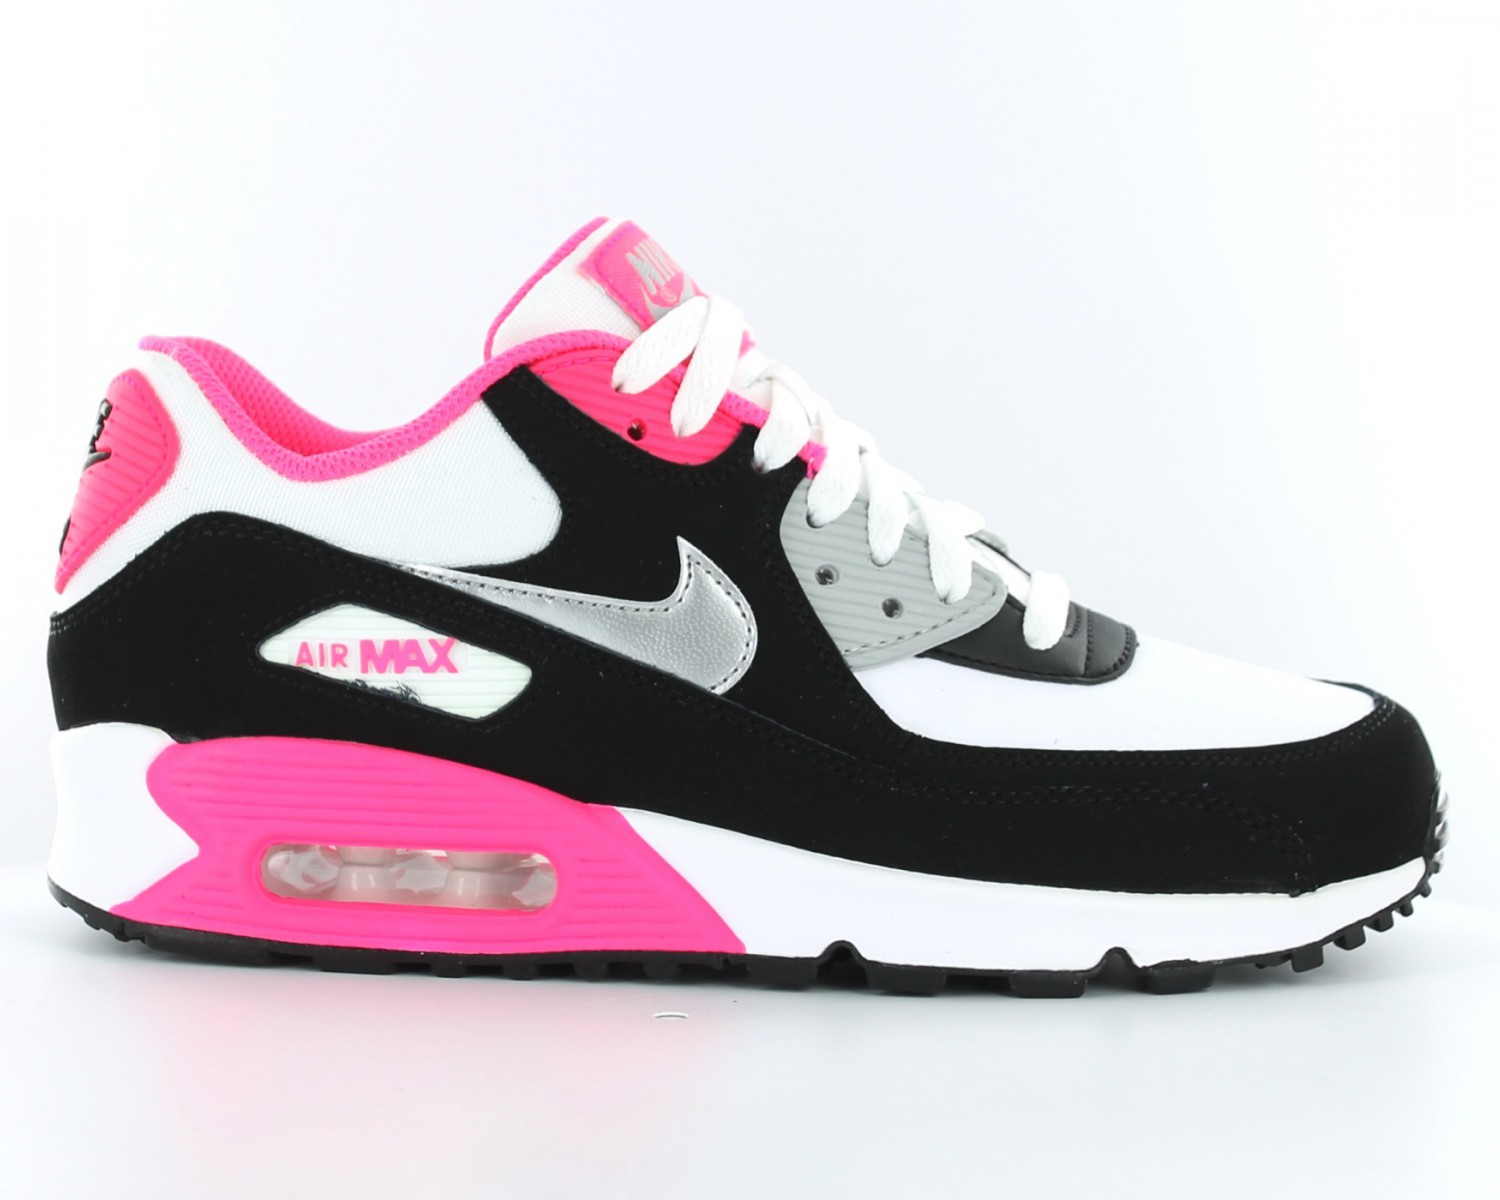 Purchase > nike air max 90 femme rose et noir, Up to 77% OFF